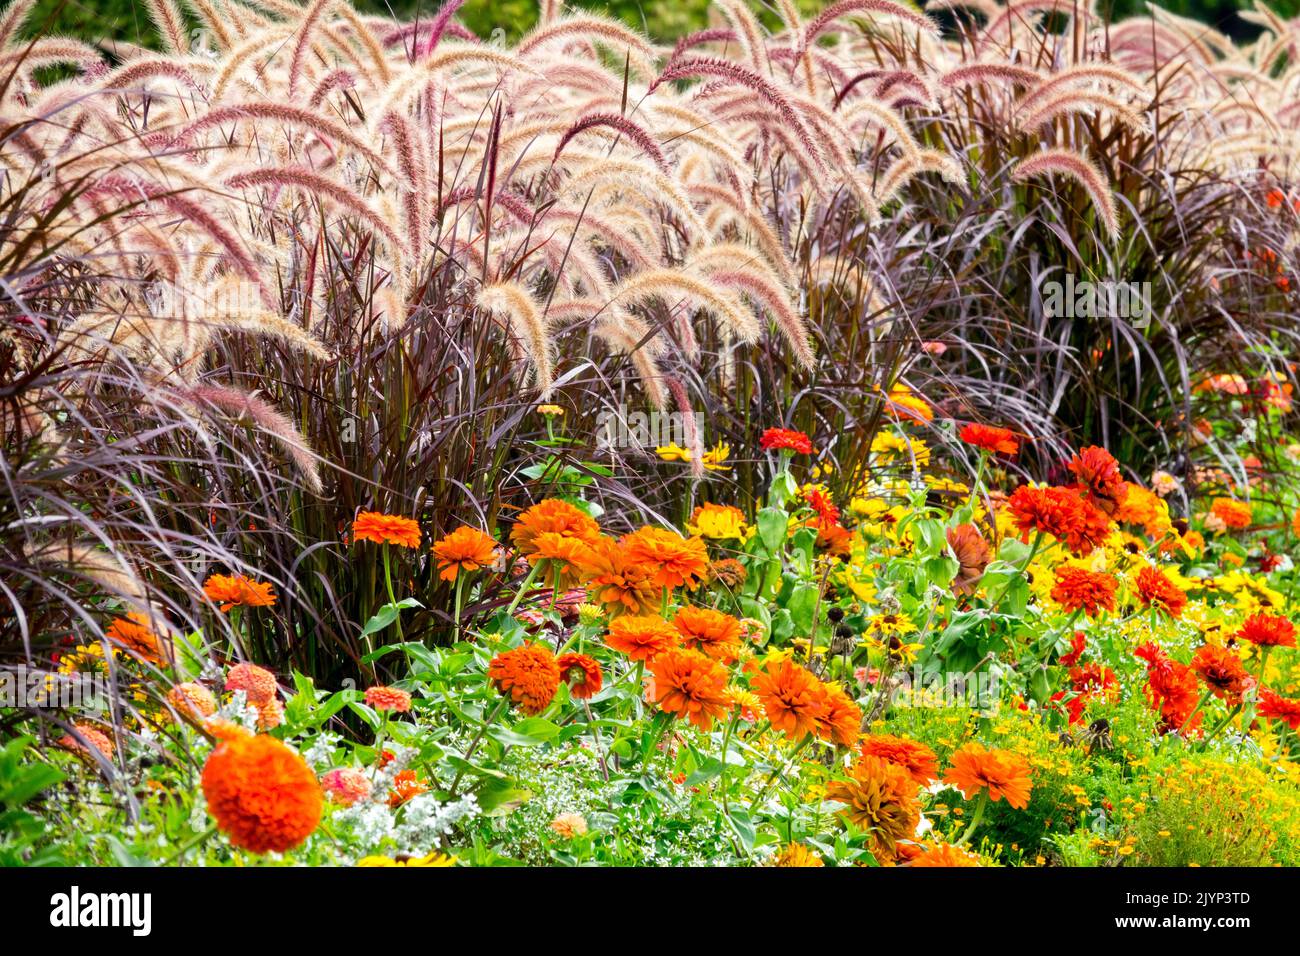 Beautiful Crimson fountain grass Pennisetum setaceum 'Rubrum' and Zinnias in a flower bed Ornamental grasses Colourful Late summer Early Autumn plants Stock Photo